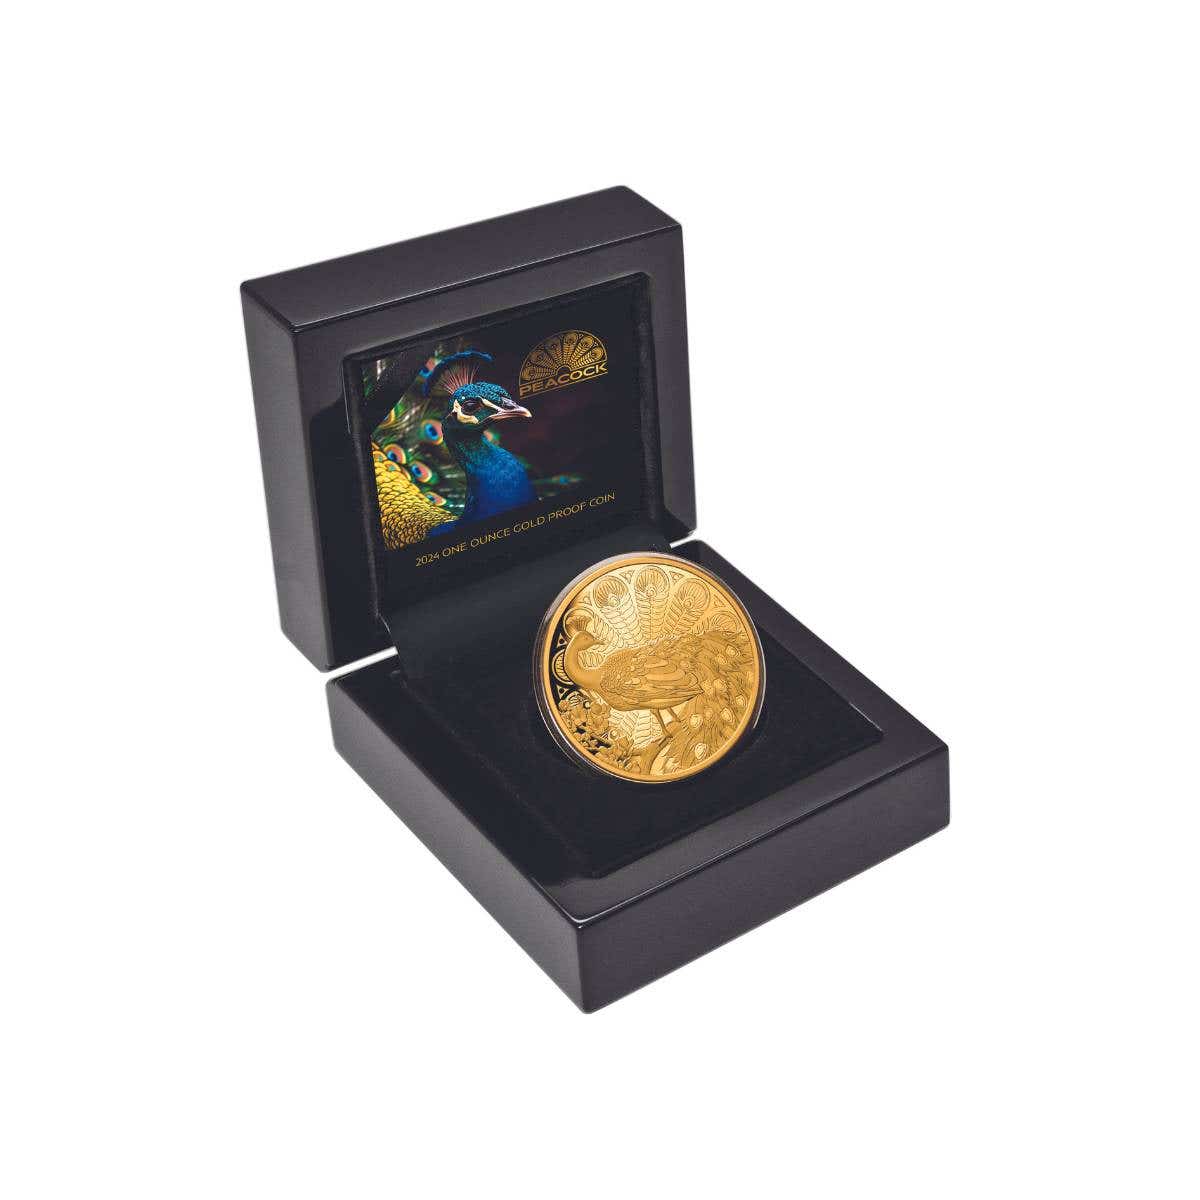 Peacock 2024 $100 1oz Gold Proof Coin